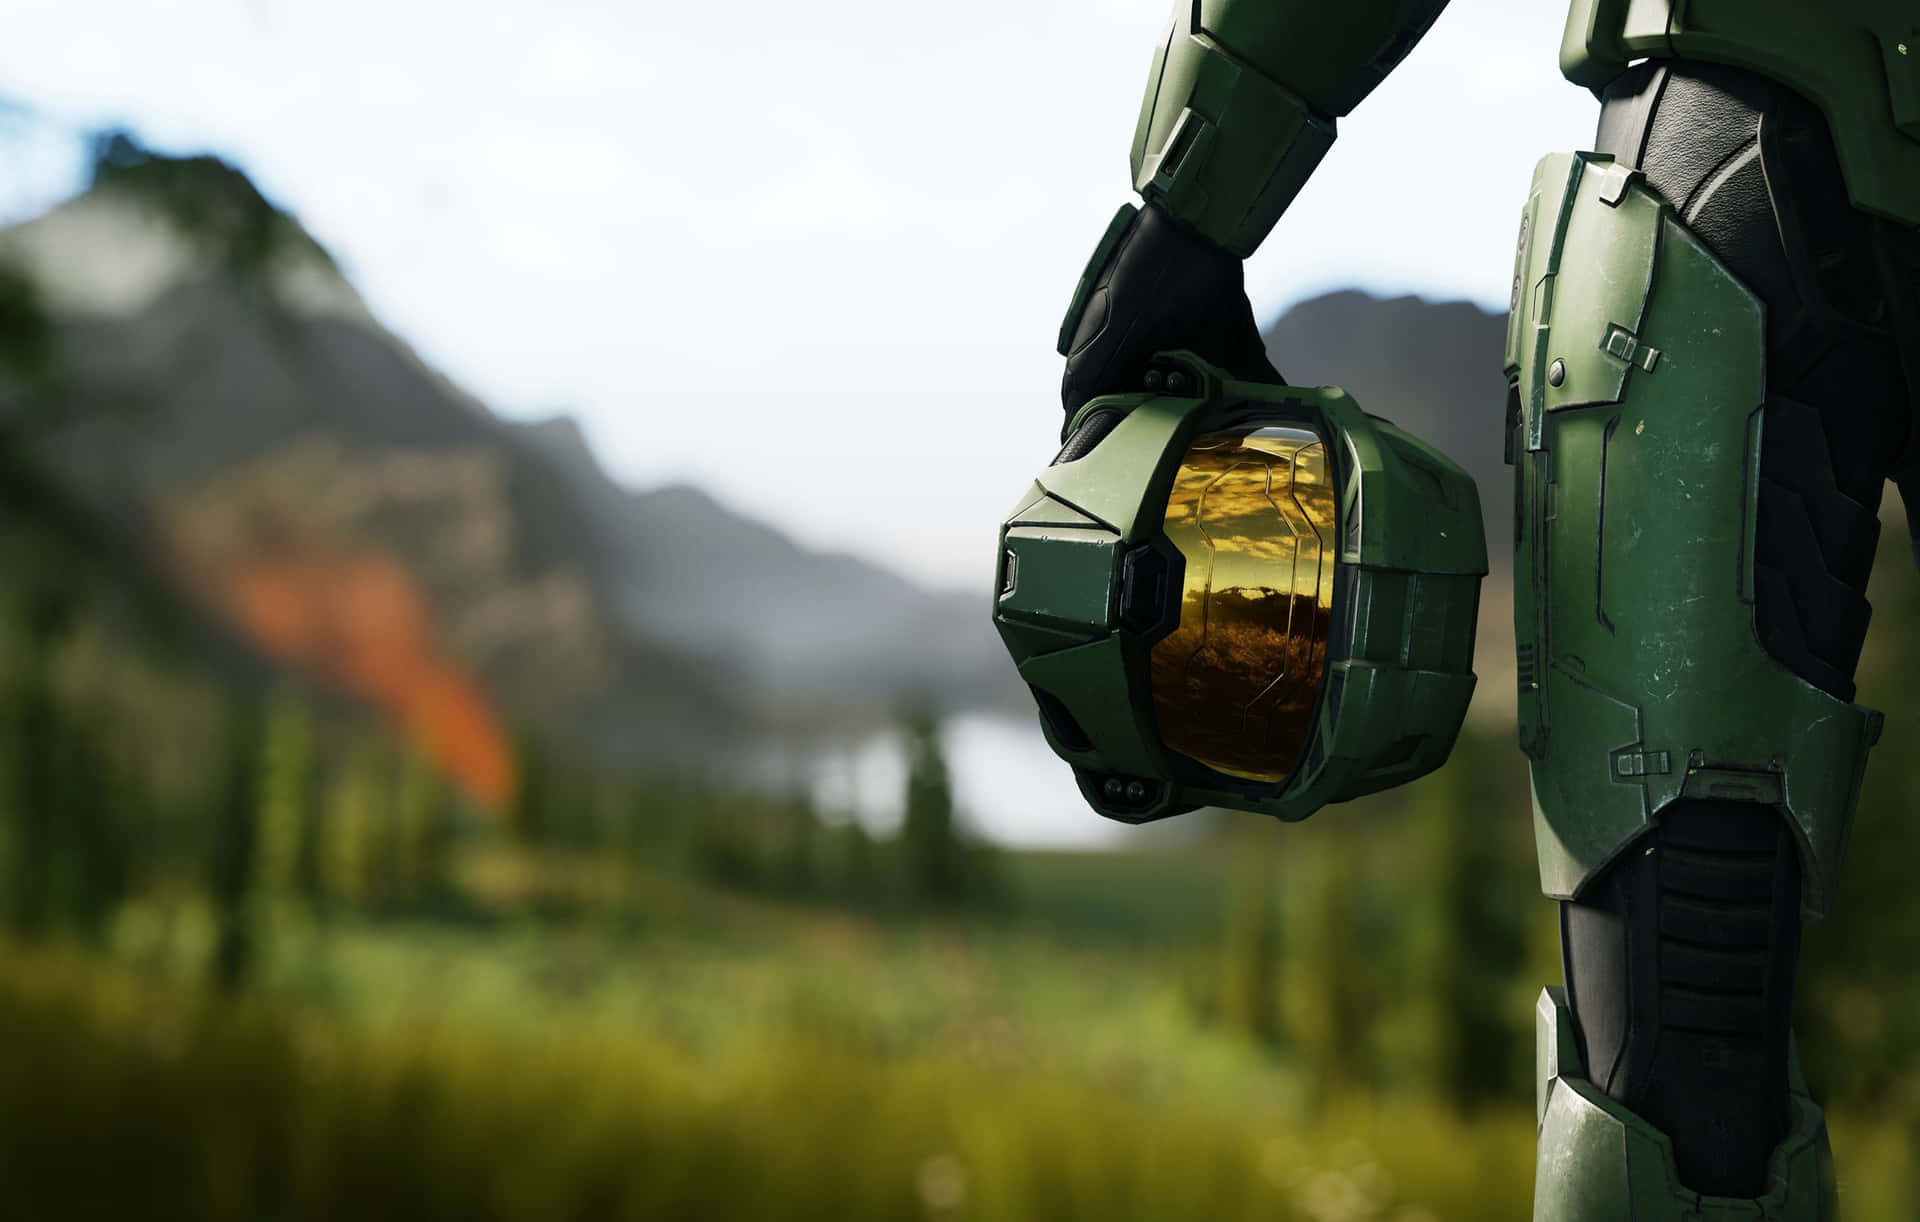 Master Chief is geared up and ready for combat